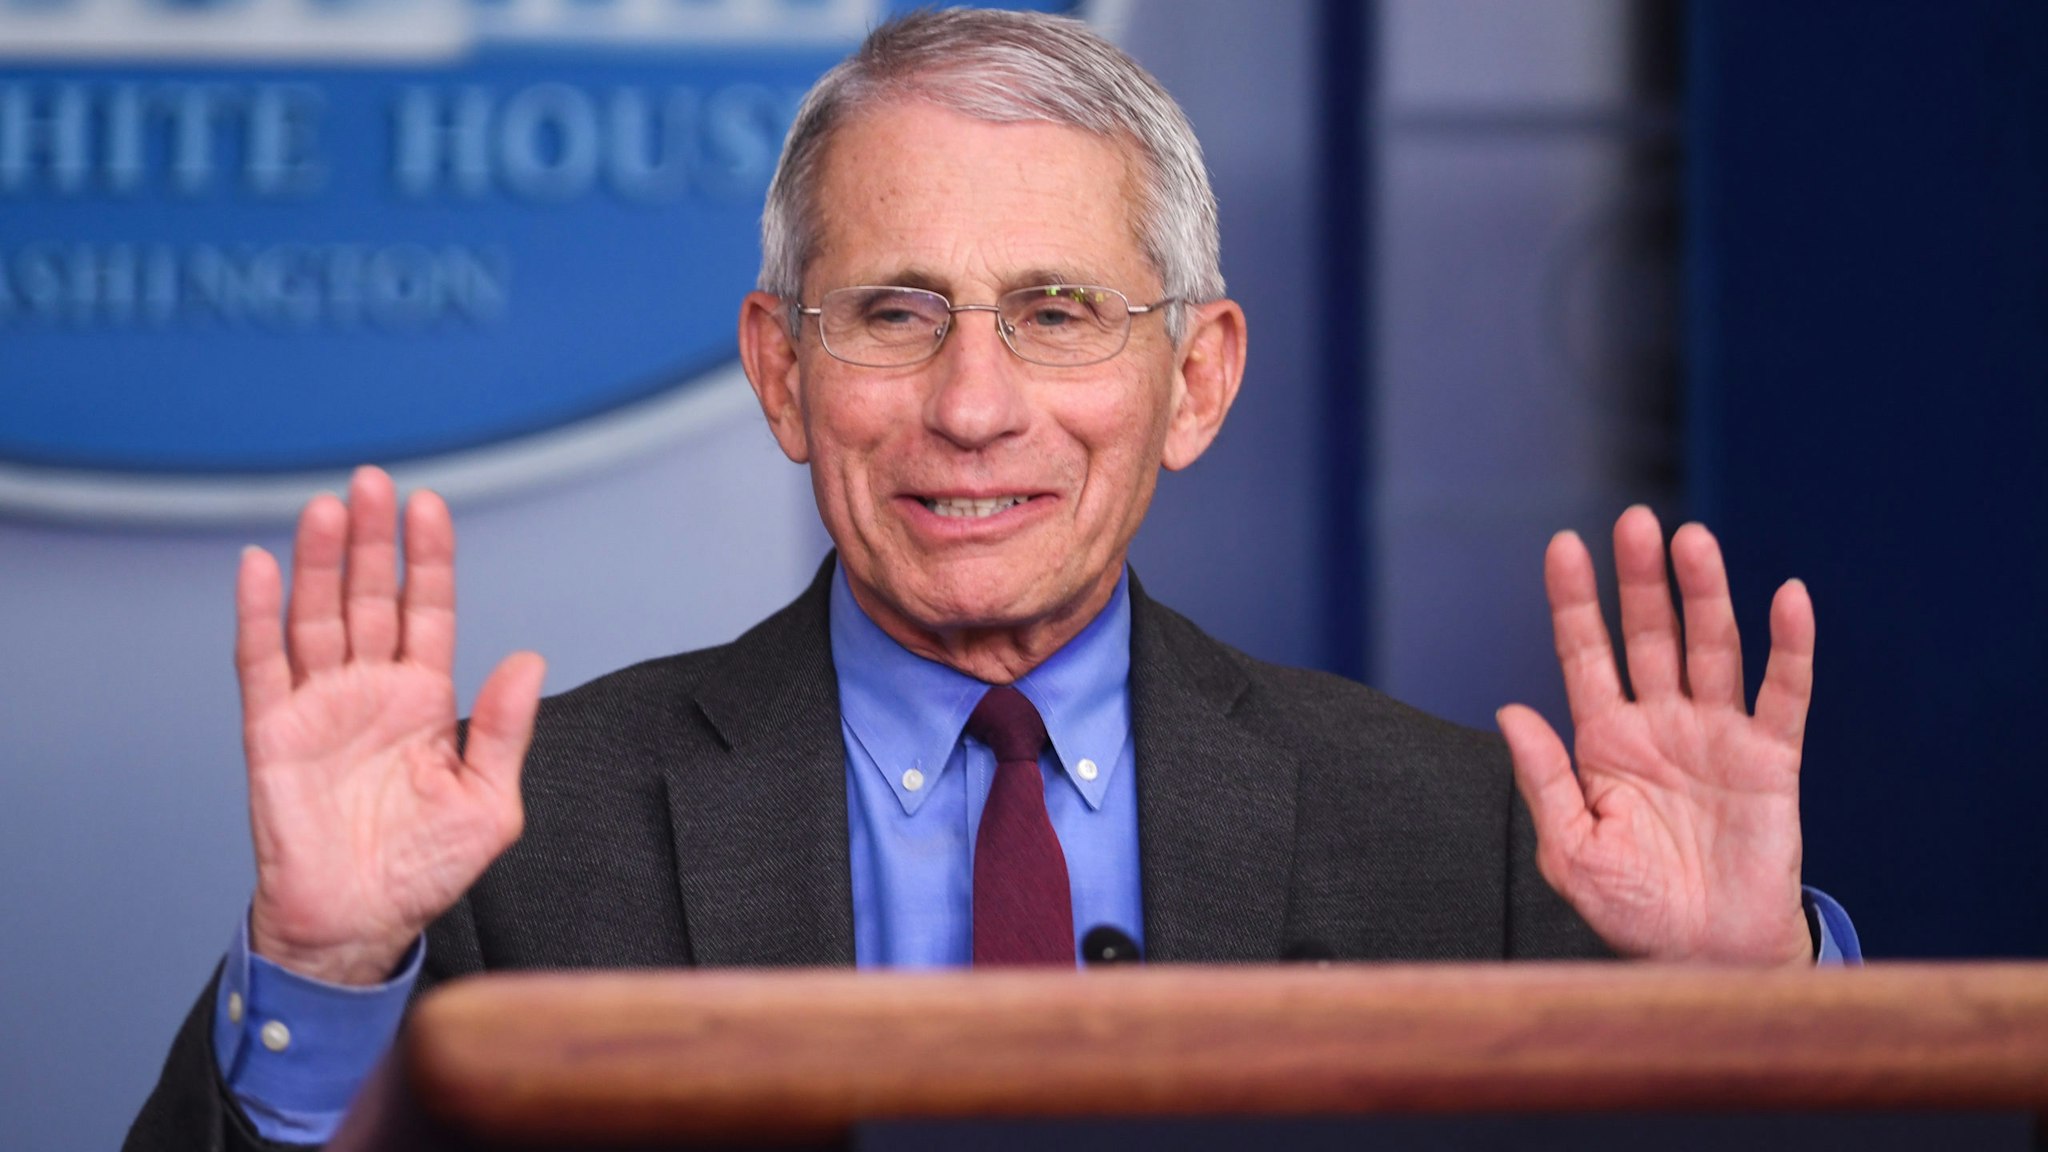 Anthony Fauci, director of the National Institute of Allergy and Infectious Diseases, speaks during a Coronavirus Task Force news conference at the White House in Washington, D.C., U.S., on Friday, April 10, 2020. President Donald Trump said he has asked his agriculture secretary to use all of the funds and authorities at his disposal, to aid U.S. farmers, whose financial peril has worsened in the coronavirus pandemic. Photographer: Kevin Dietsch/UPI/Bloomberg via Getty Images